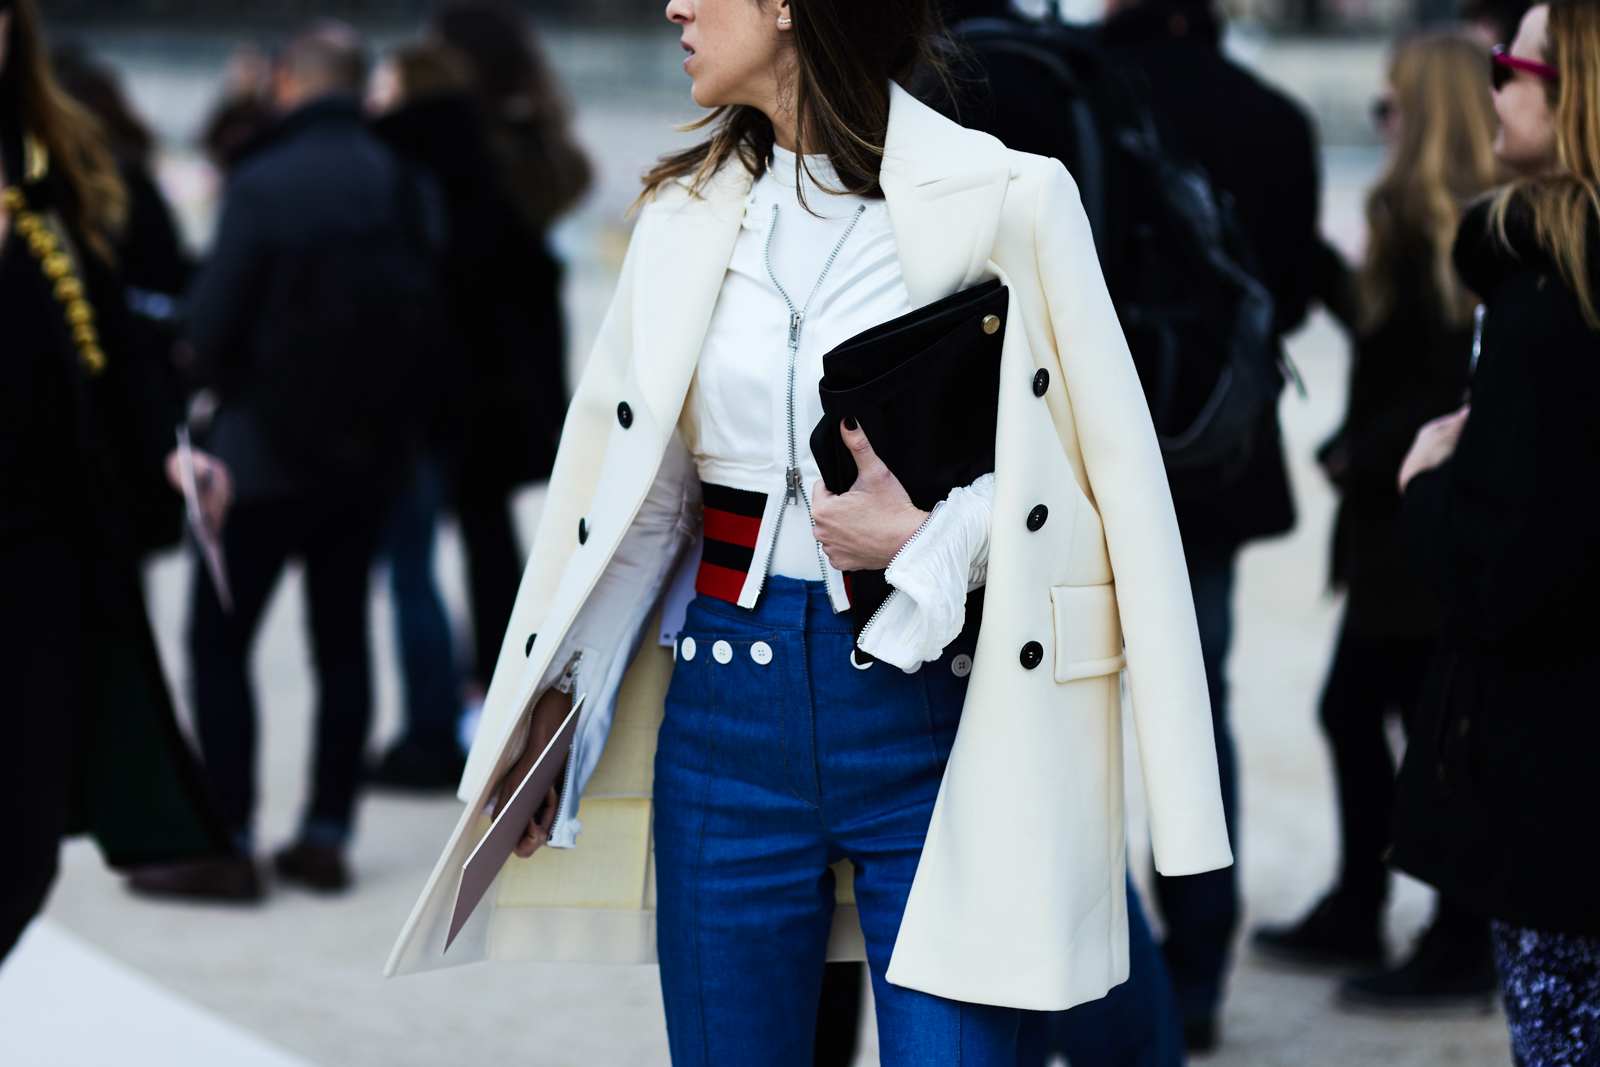 A woman wearing a white coat and jeans before the Valentino Fall/Winter 2016-2017 fashion show in Paris, France